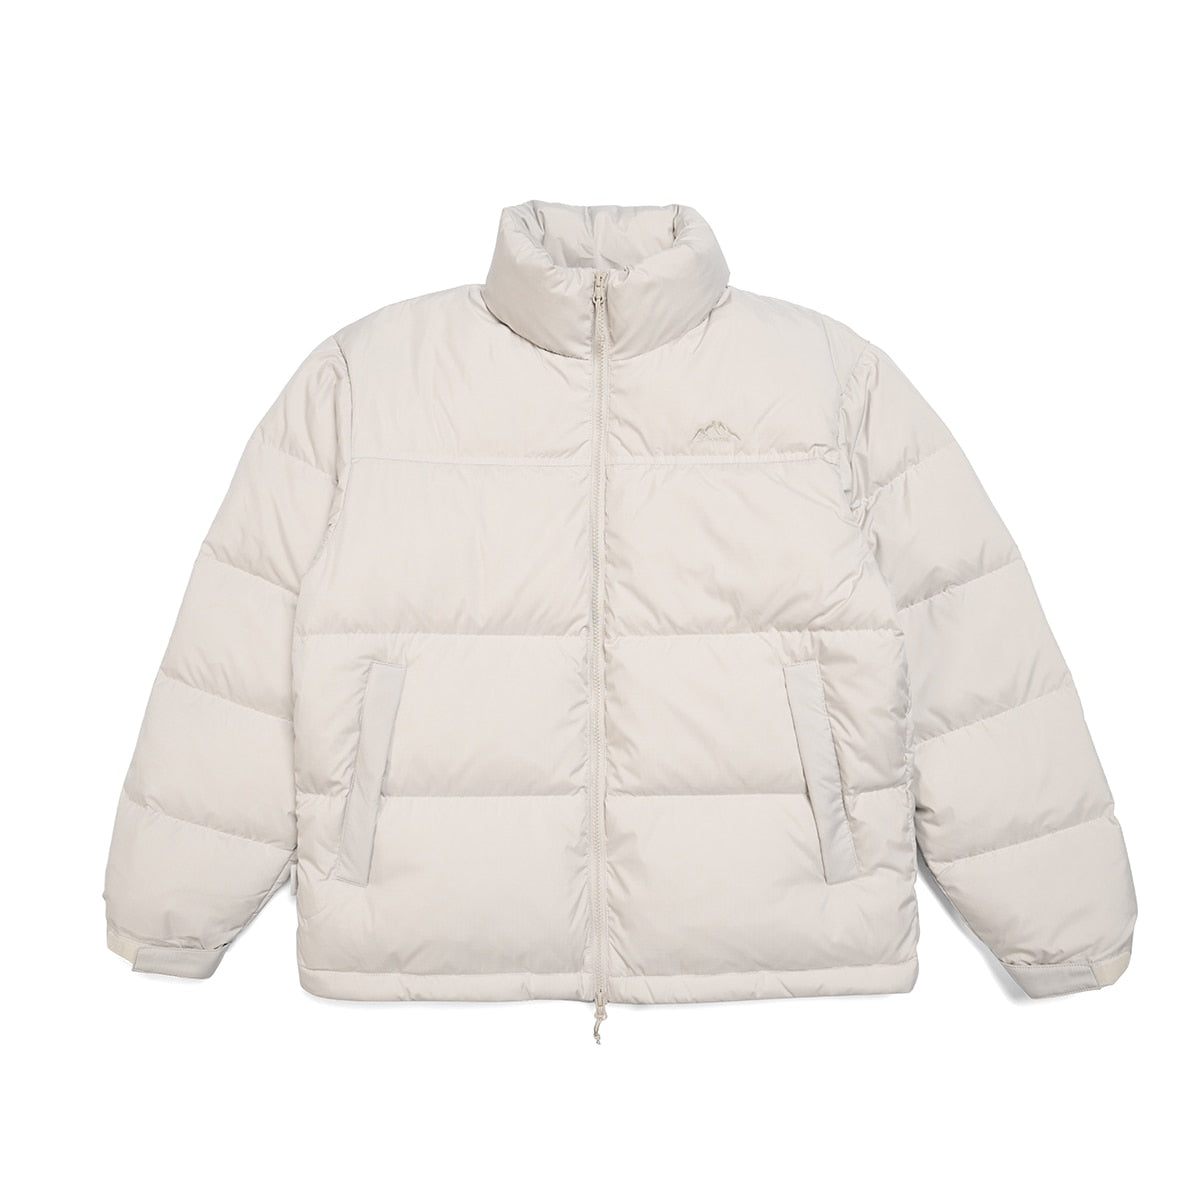 Thick Warm Windproof Jackets